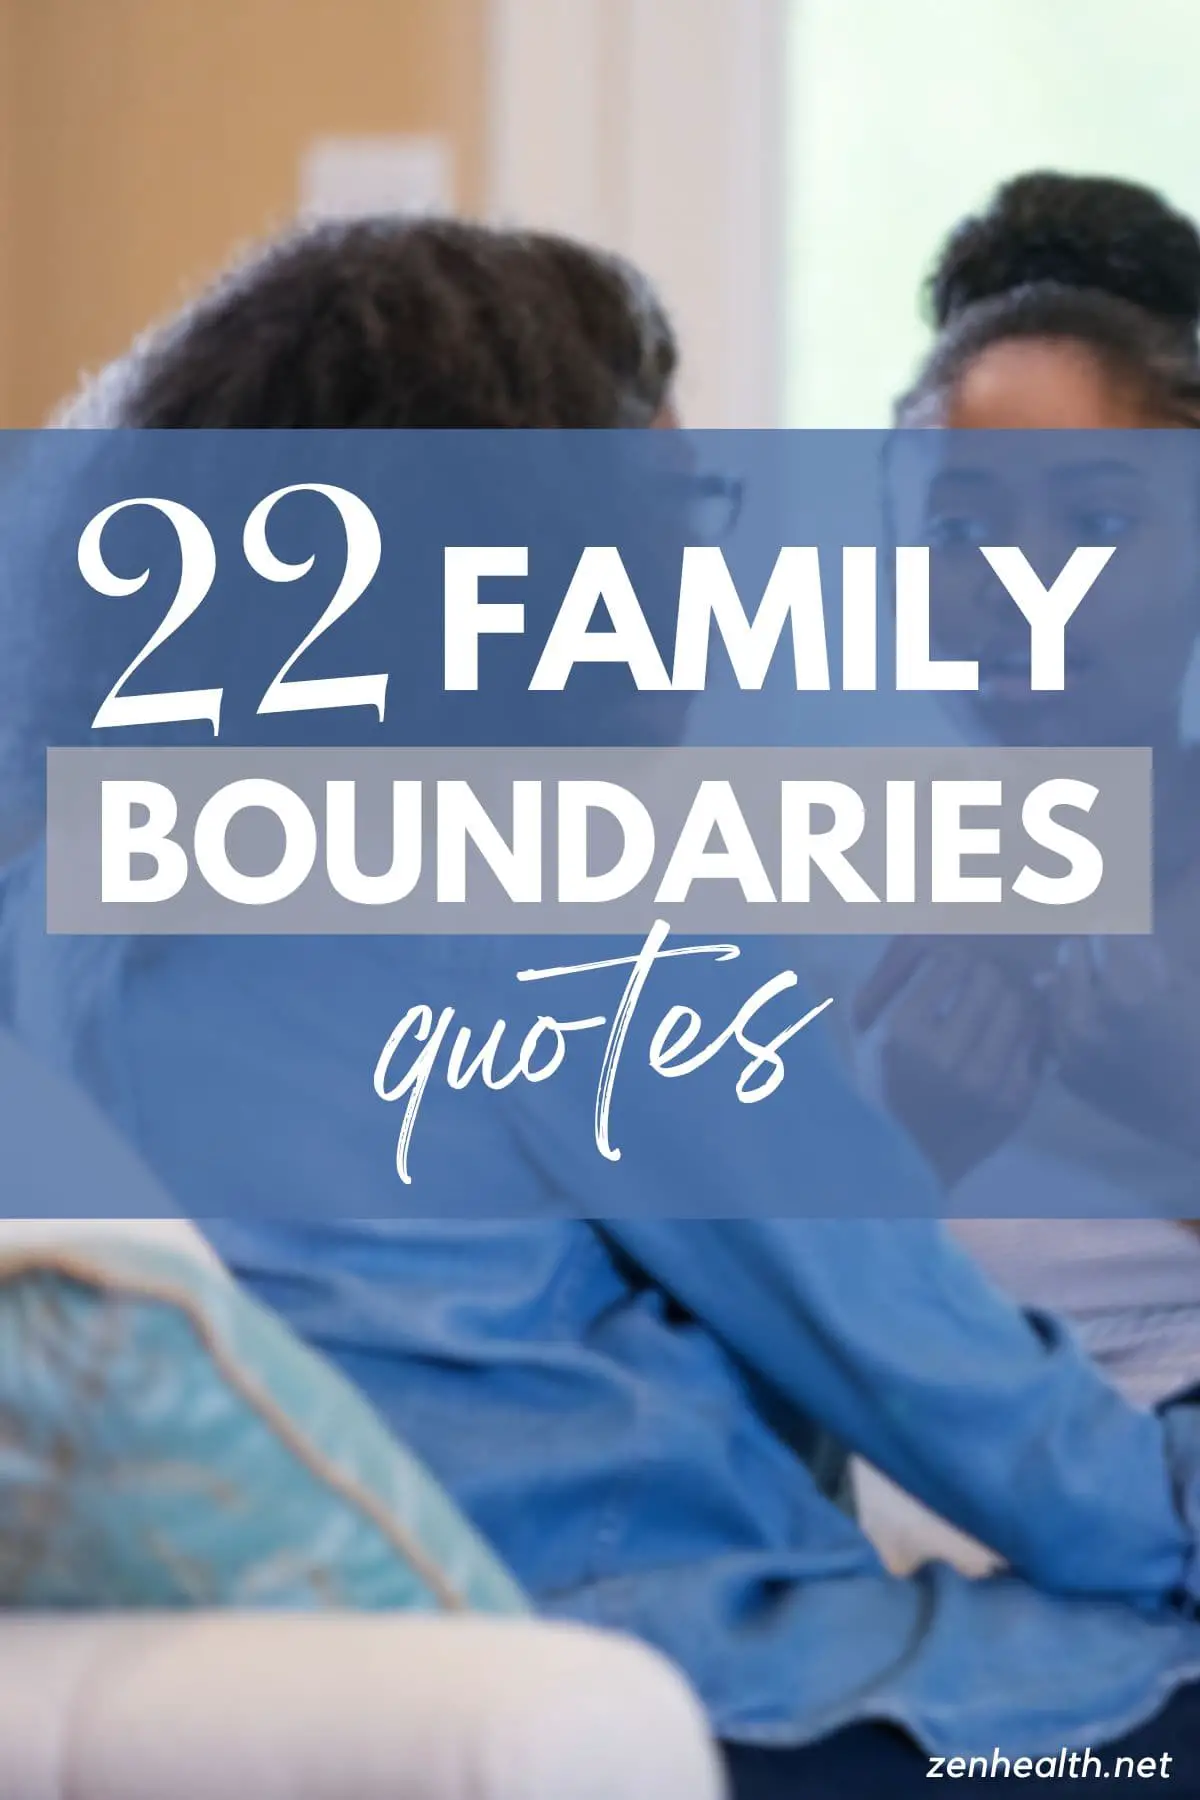 22 family boundaries quotes text overlay on a photo of a young girl speaking to an older woman while sitting on a sofa